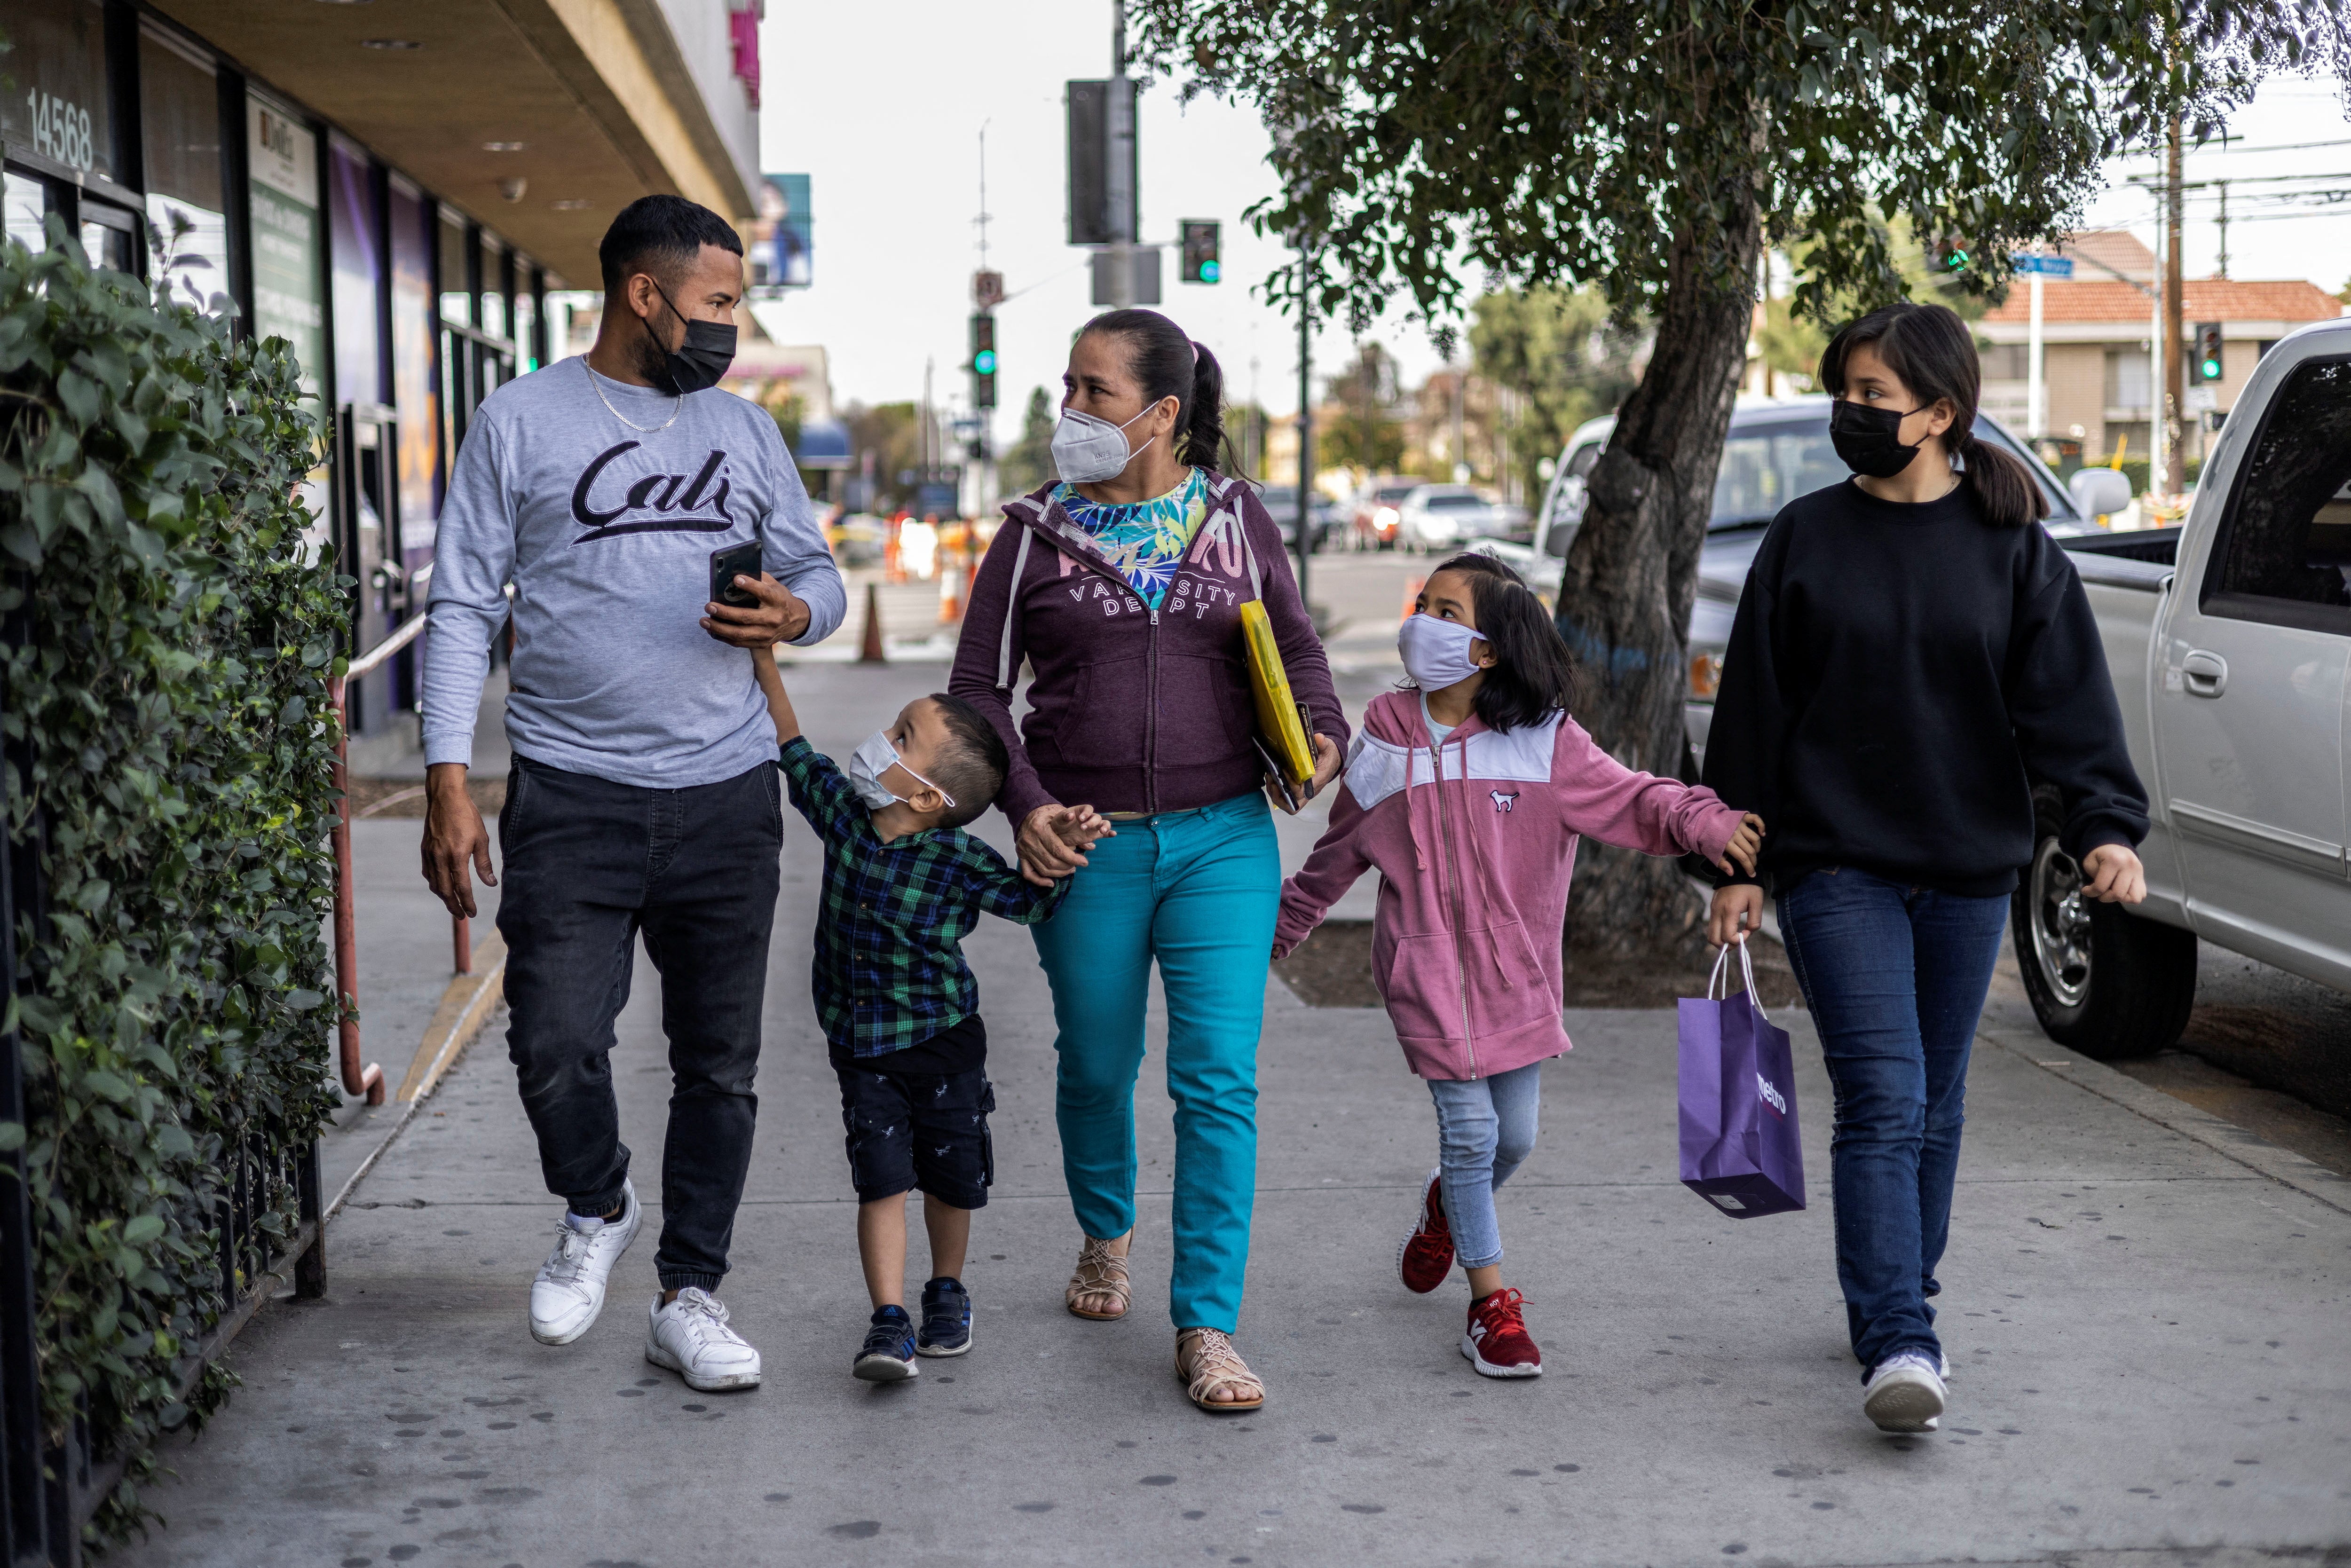 Maria walks with Maynor, Aron, Nicole and Michelle along a street in Los Angeles